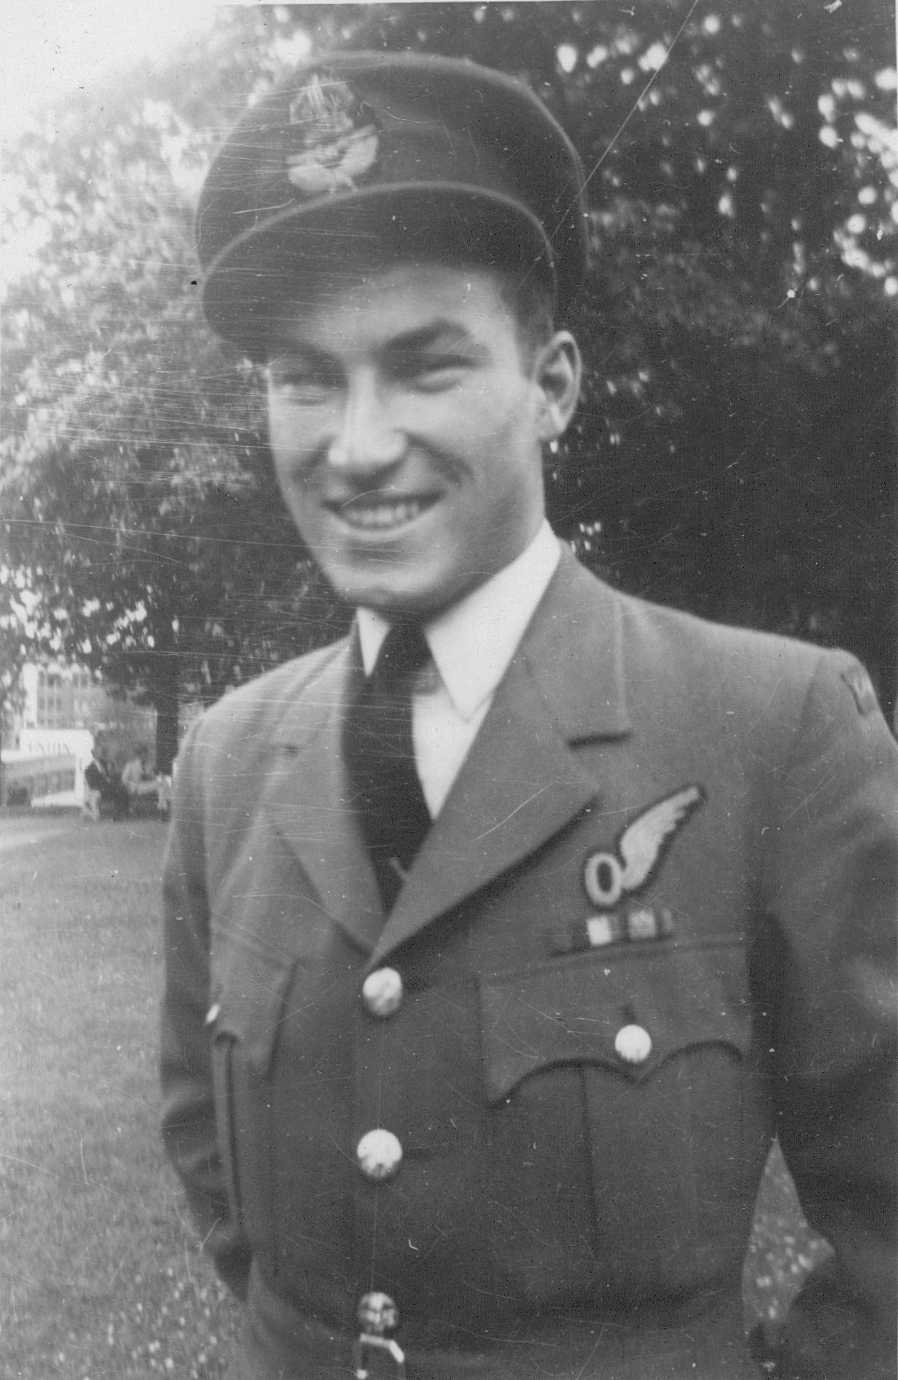  PHOTO 3 of Hubert Brooks After Completion of Training with RCAF  